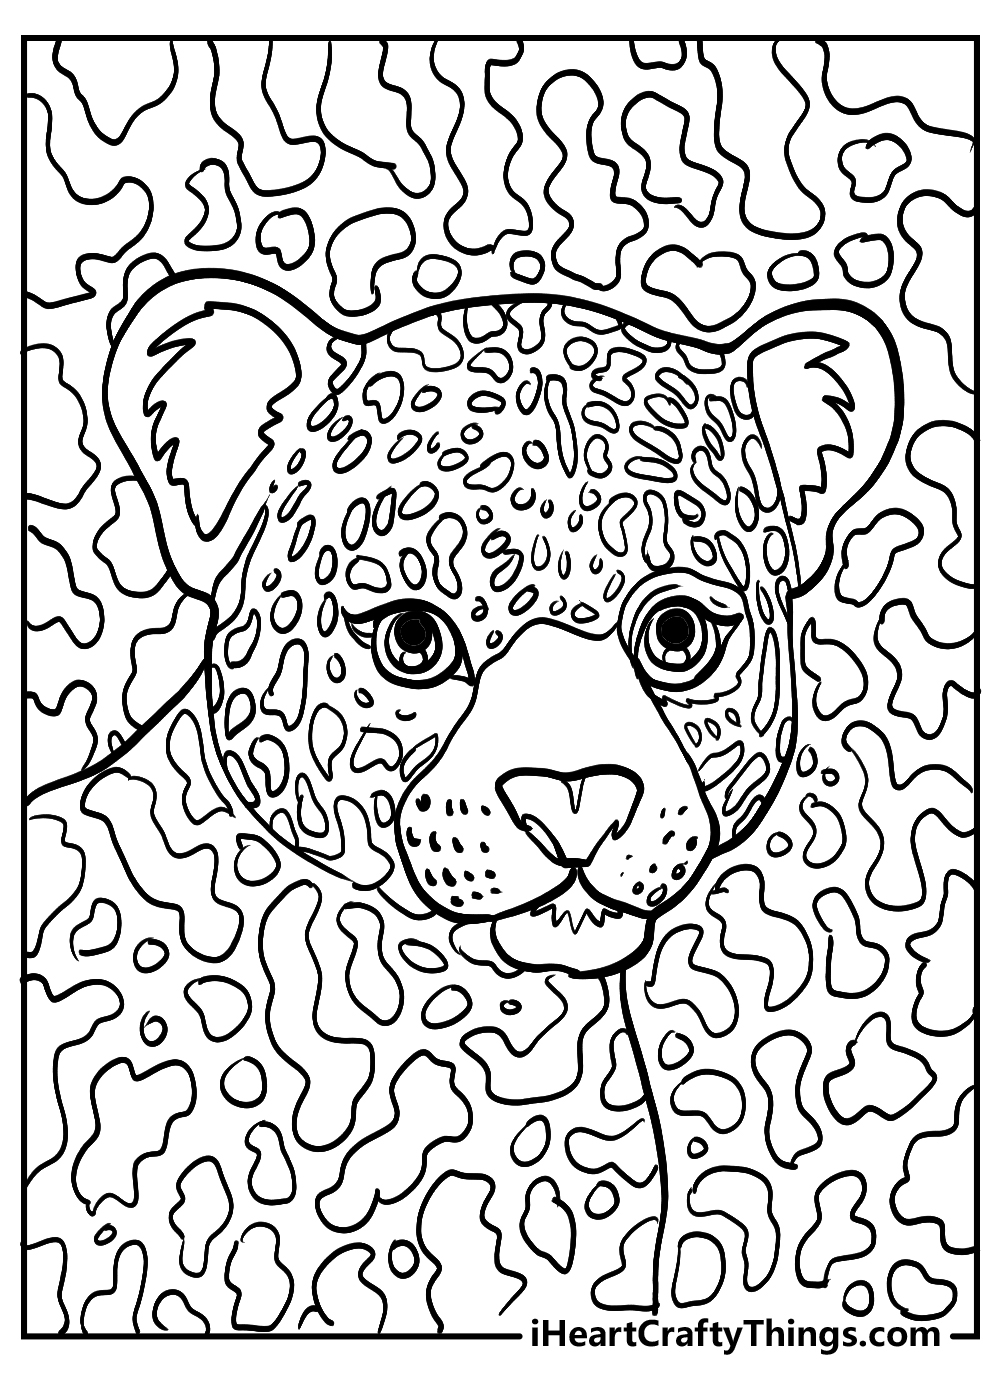 Printable lisa frank coloring pages updated